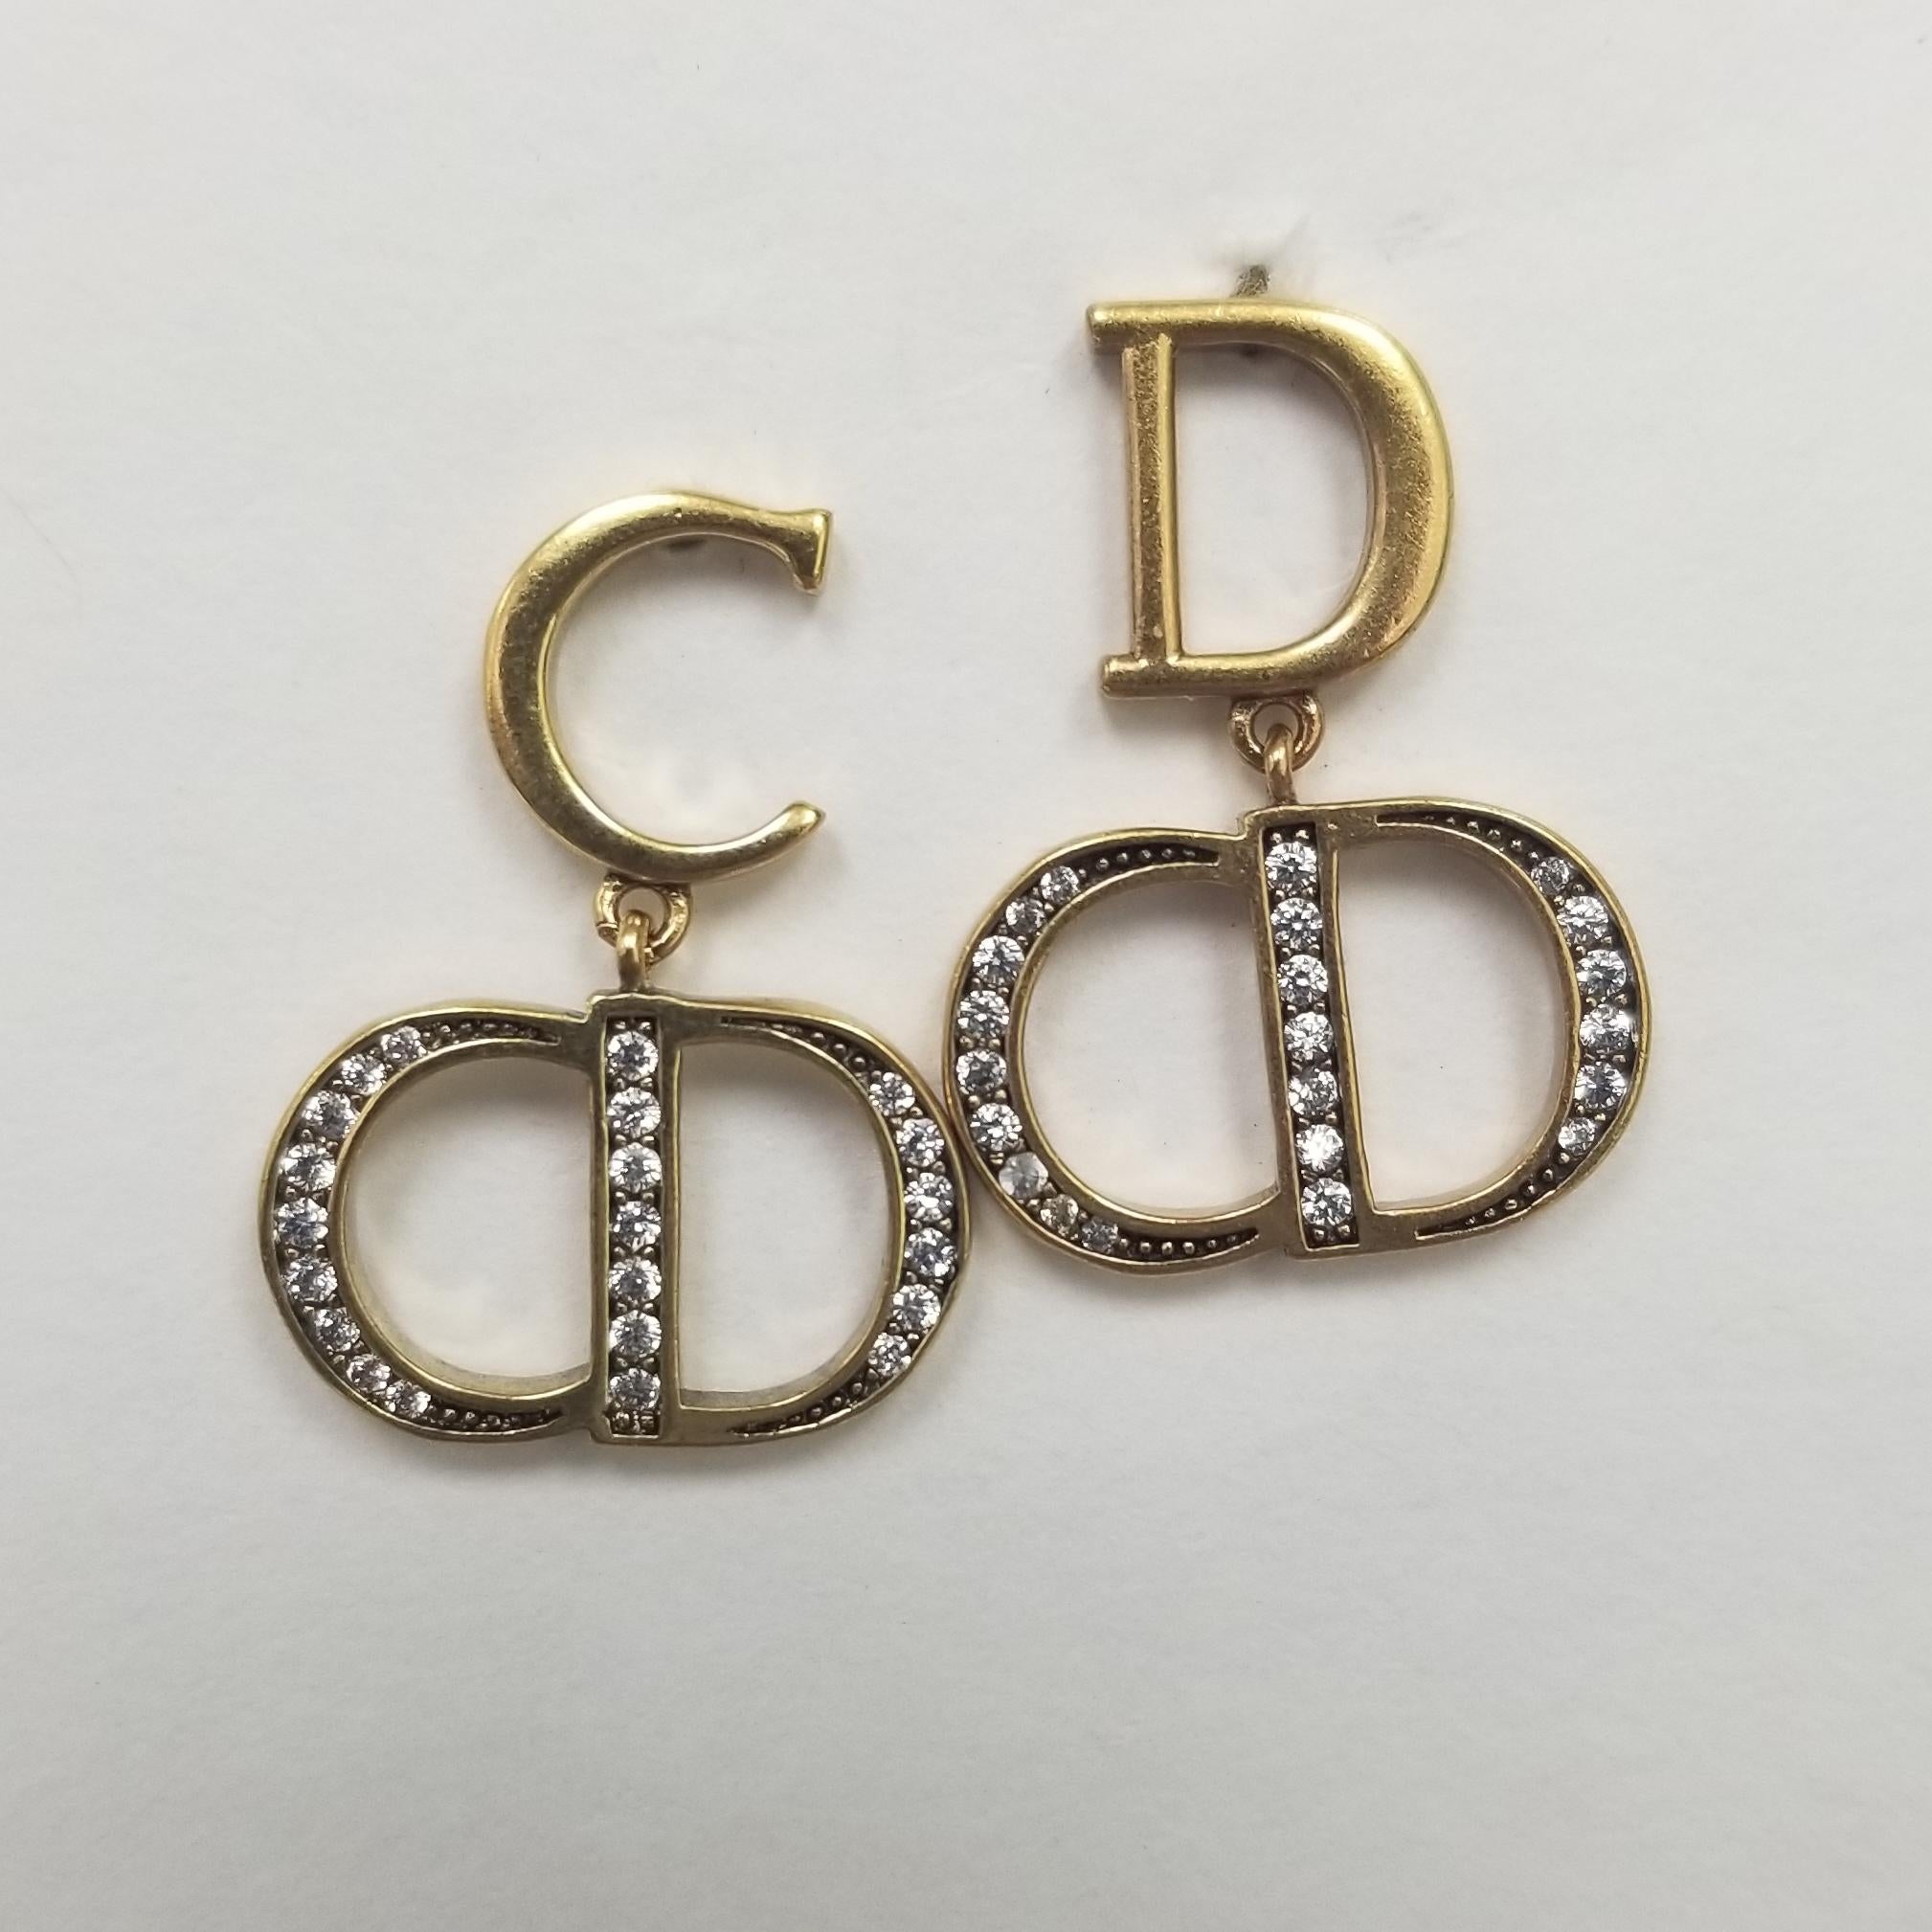 The listing is for a rare vintage runway Christian Dior necklace and matching rhinestones earrings. the necklace consist of a gold metal link and smaller link adjustable to 15.5 inches. necklace is normal wear for the period. the earrings have the